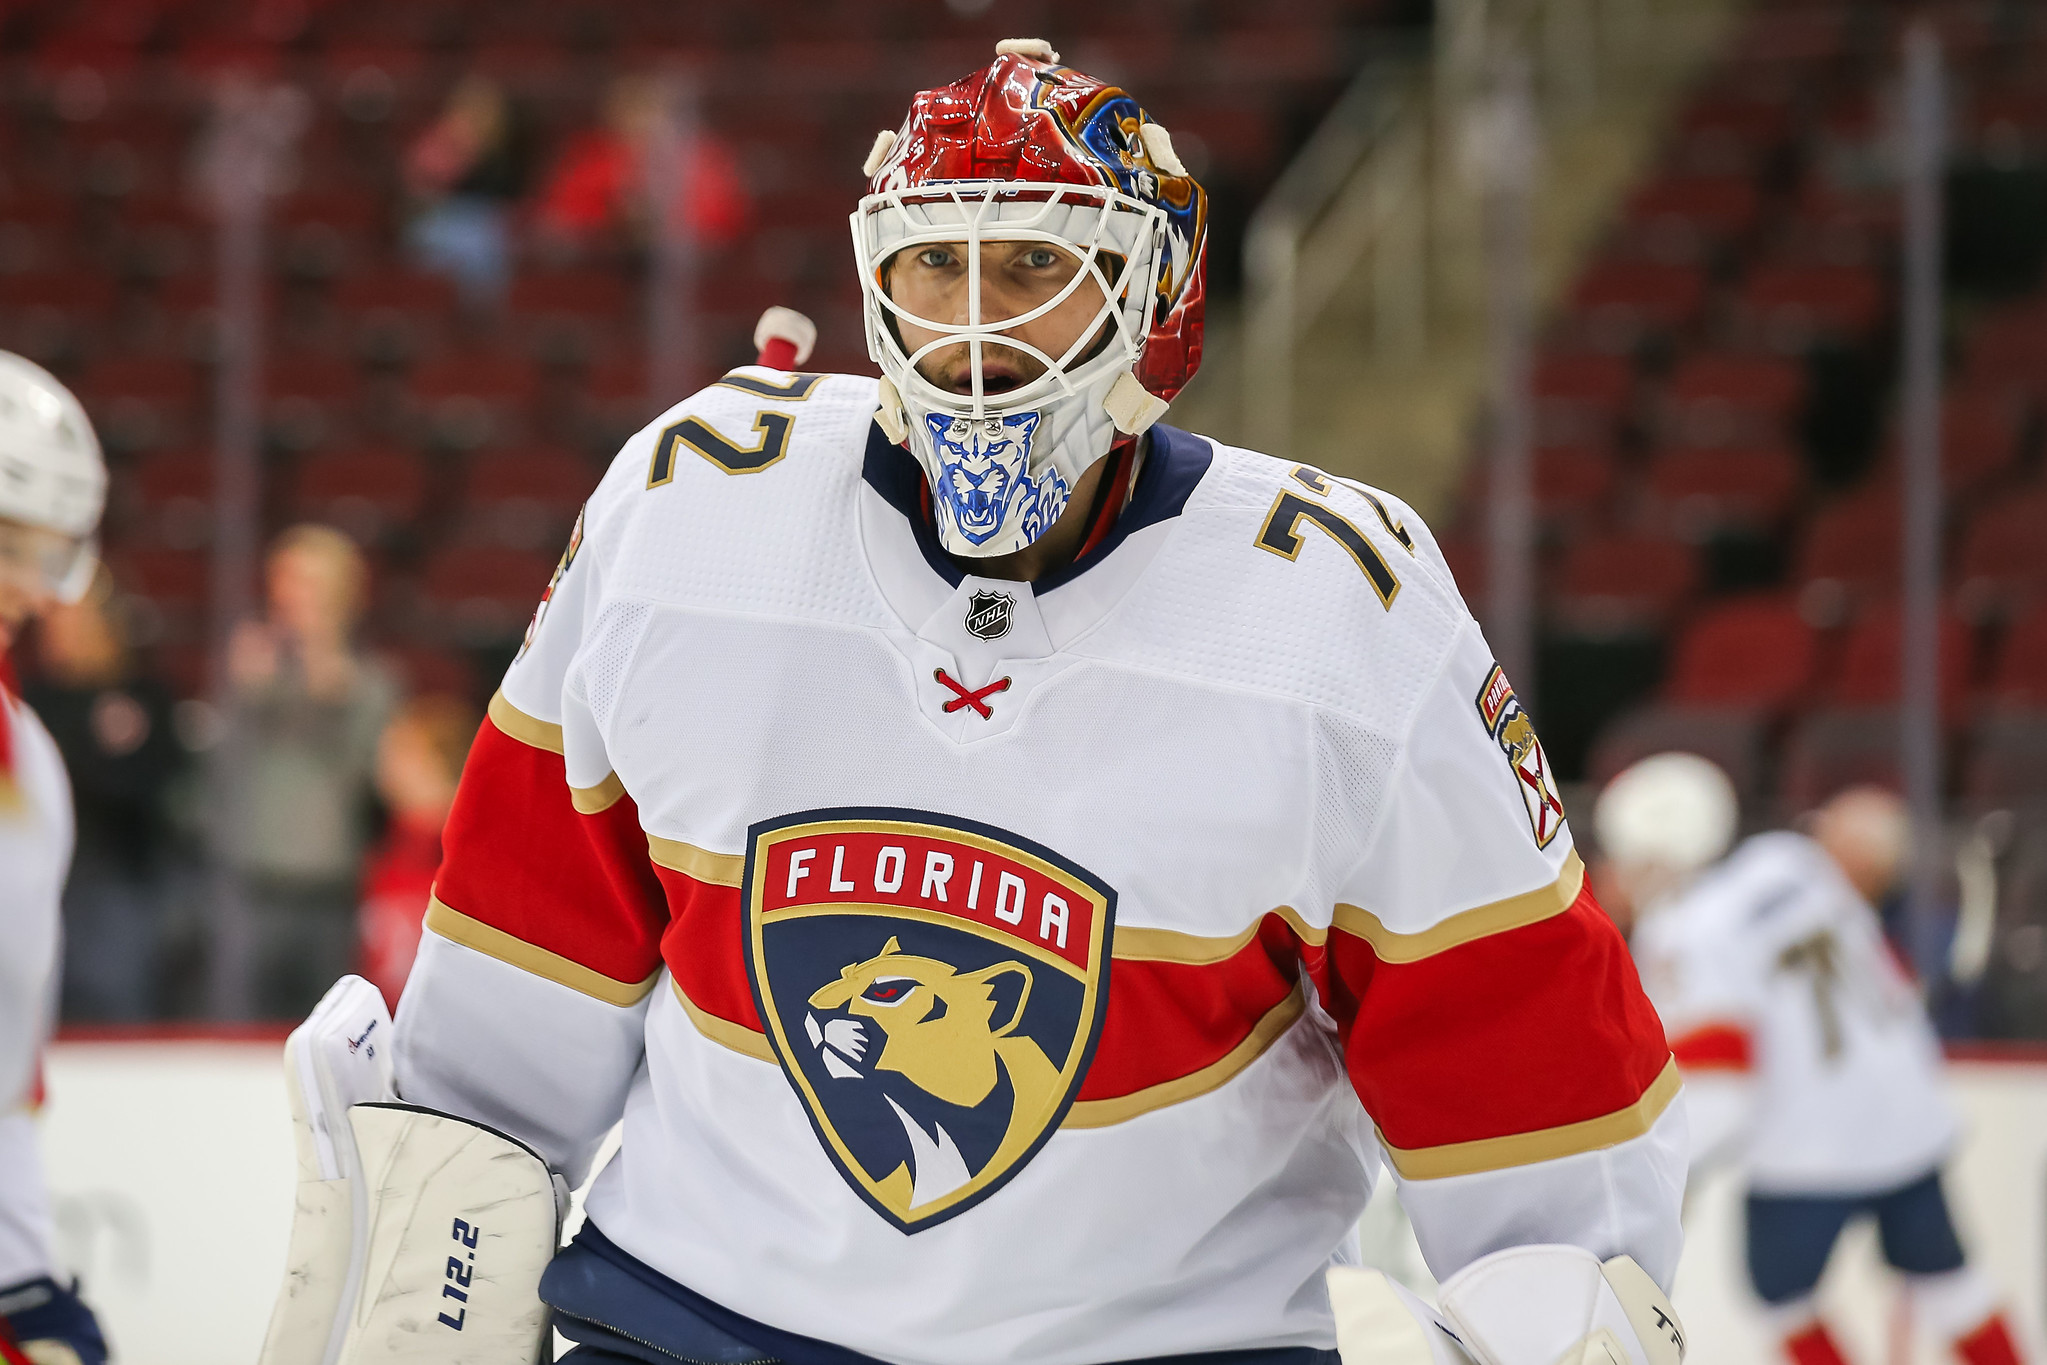 Sergei Bobrovsky Leads Florida Panthers to Stanley Cup Victory, Cements Hall of Fame Case